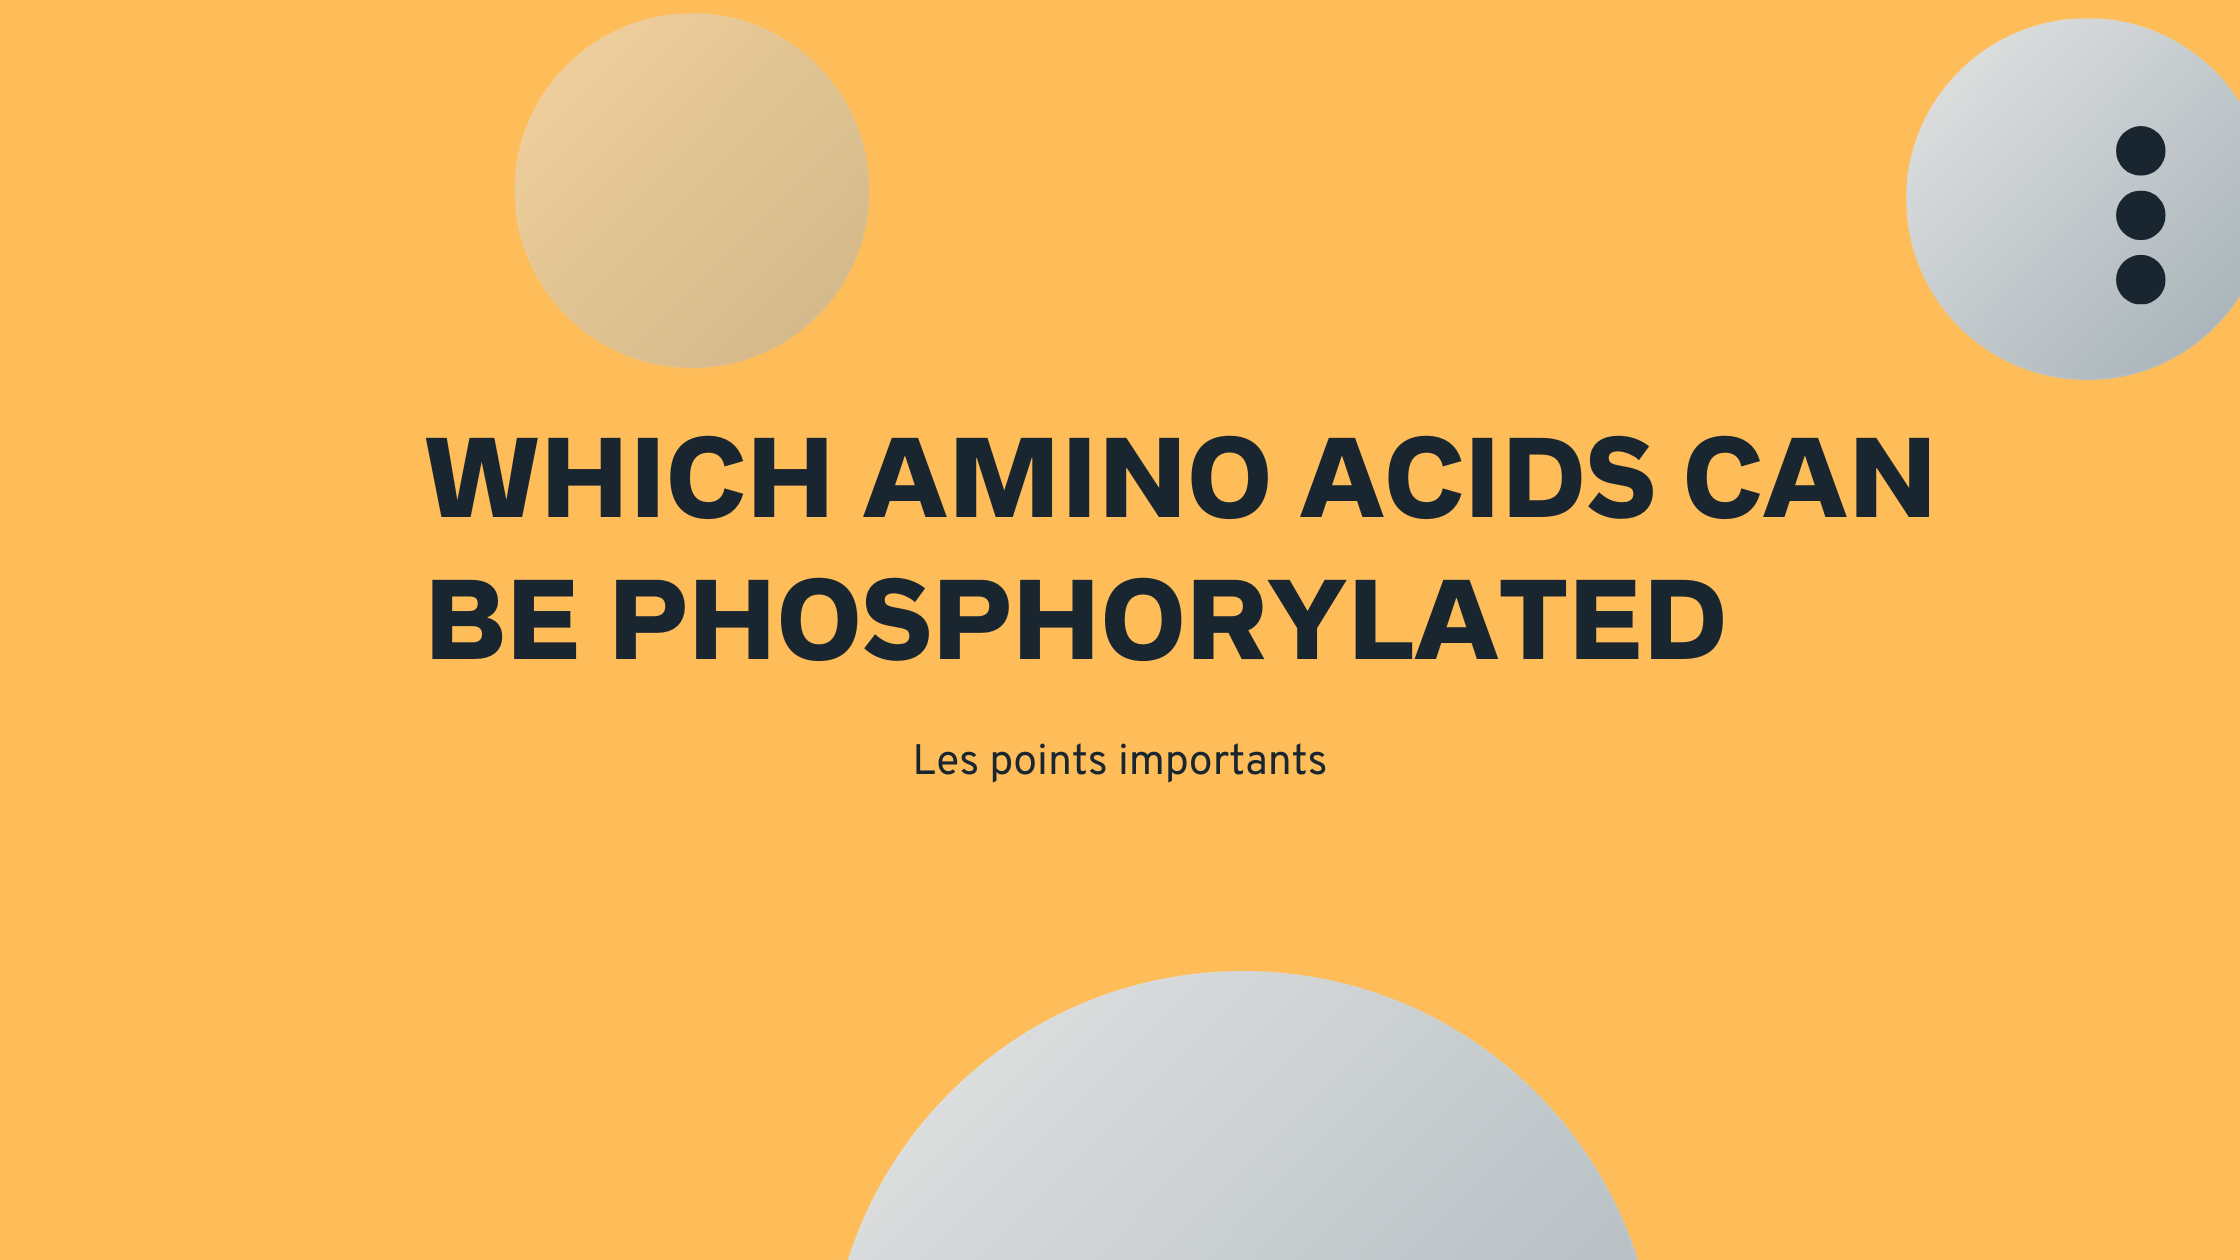 which amino acids can be phosphorylated | Les points importants